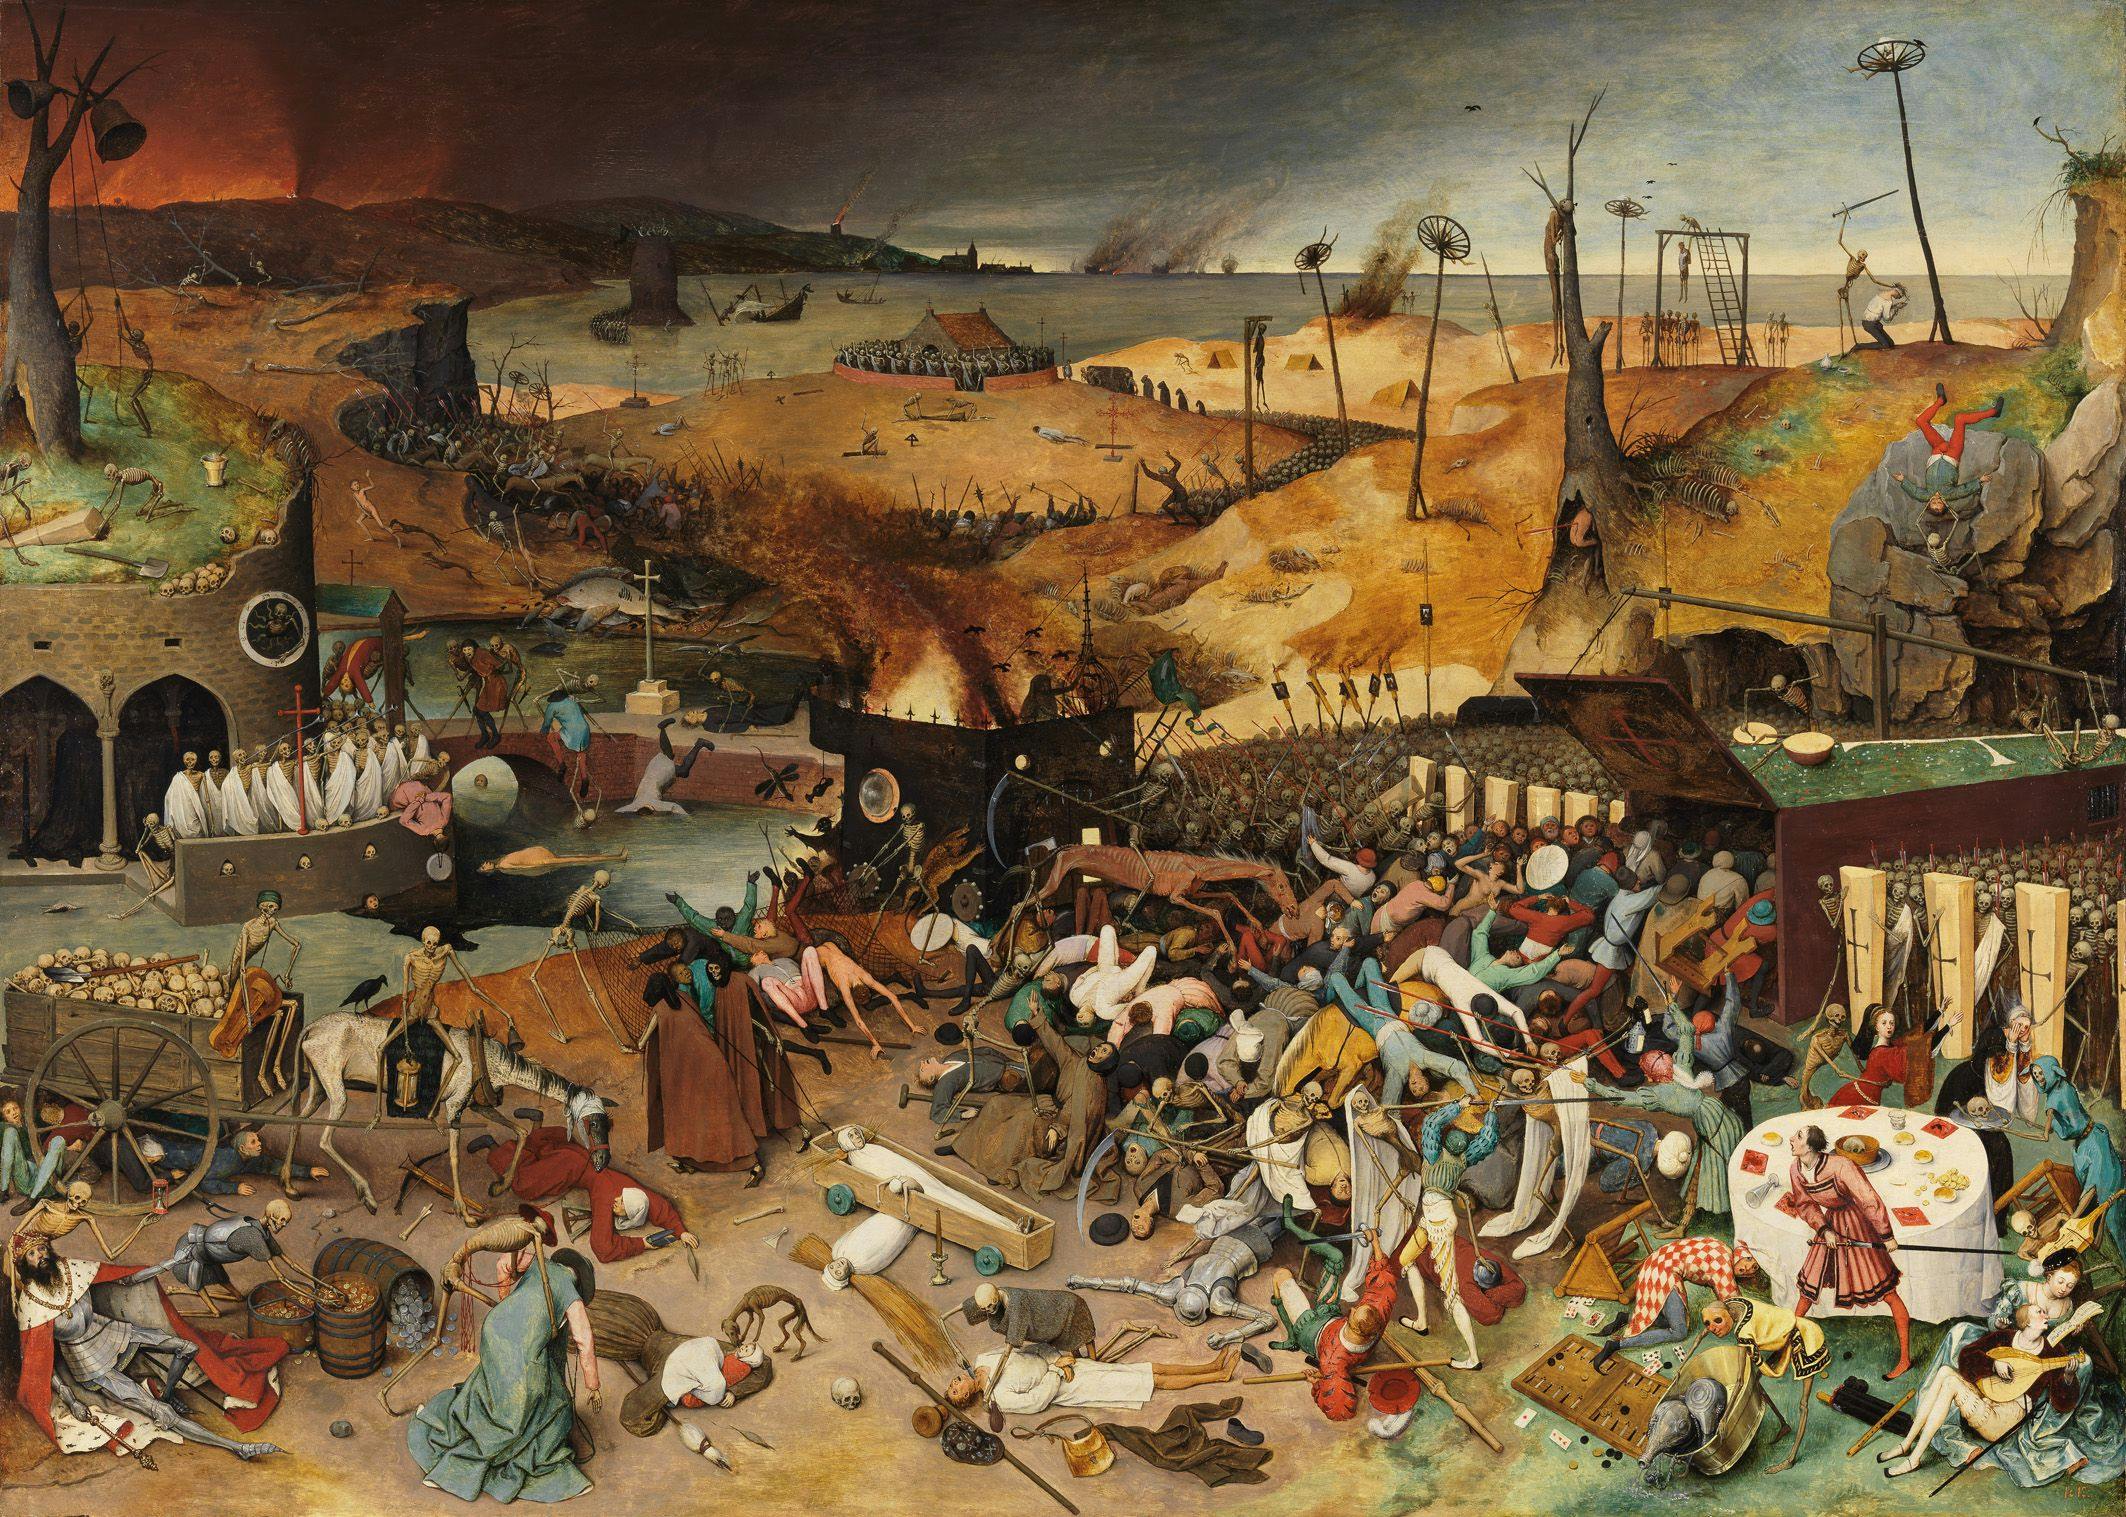 Pieter Bruegel’s The Triumph of Death reflects the social upheaval and terror that followed plague, which devastated medieval Europe.